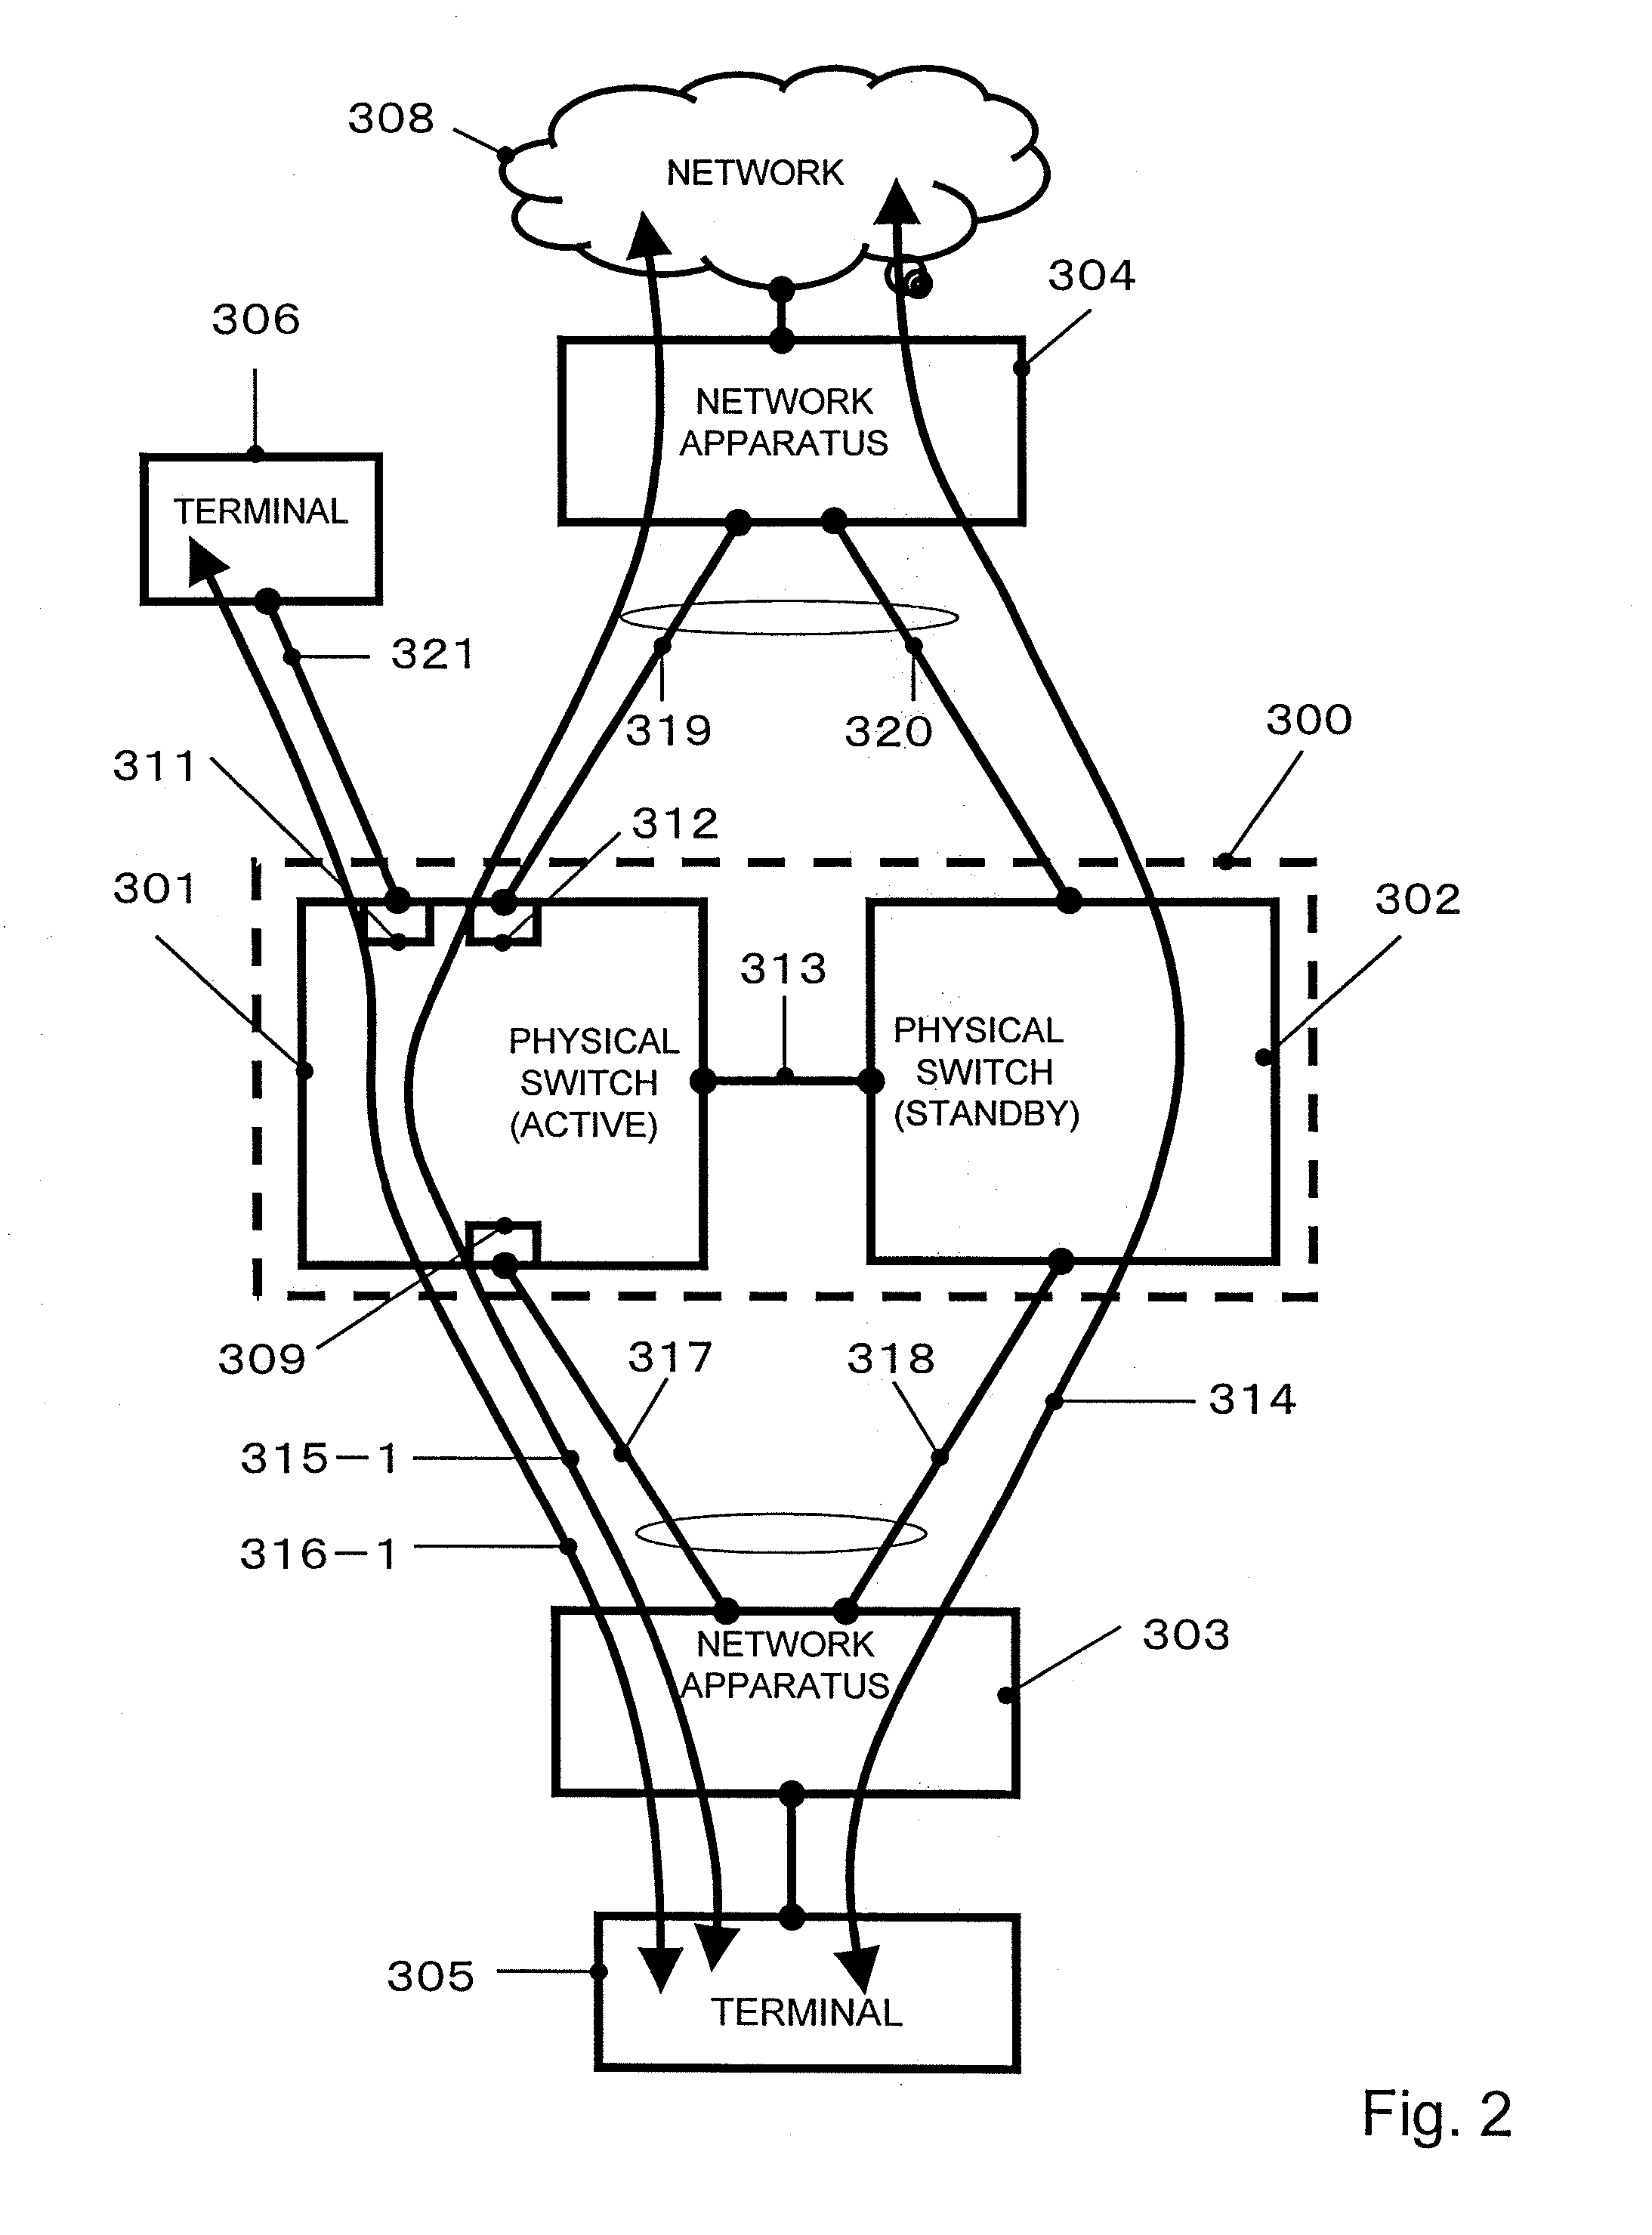 Network system and network apparatus